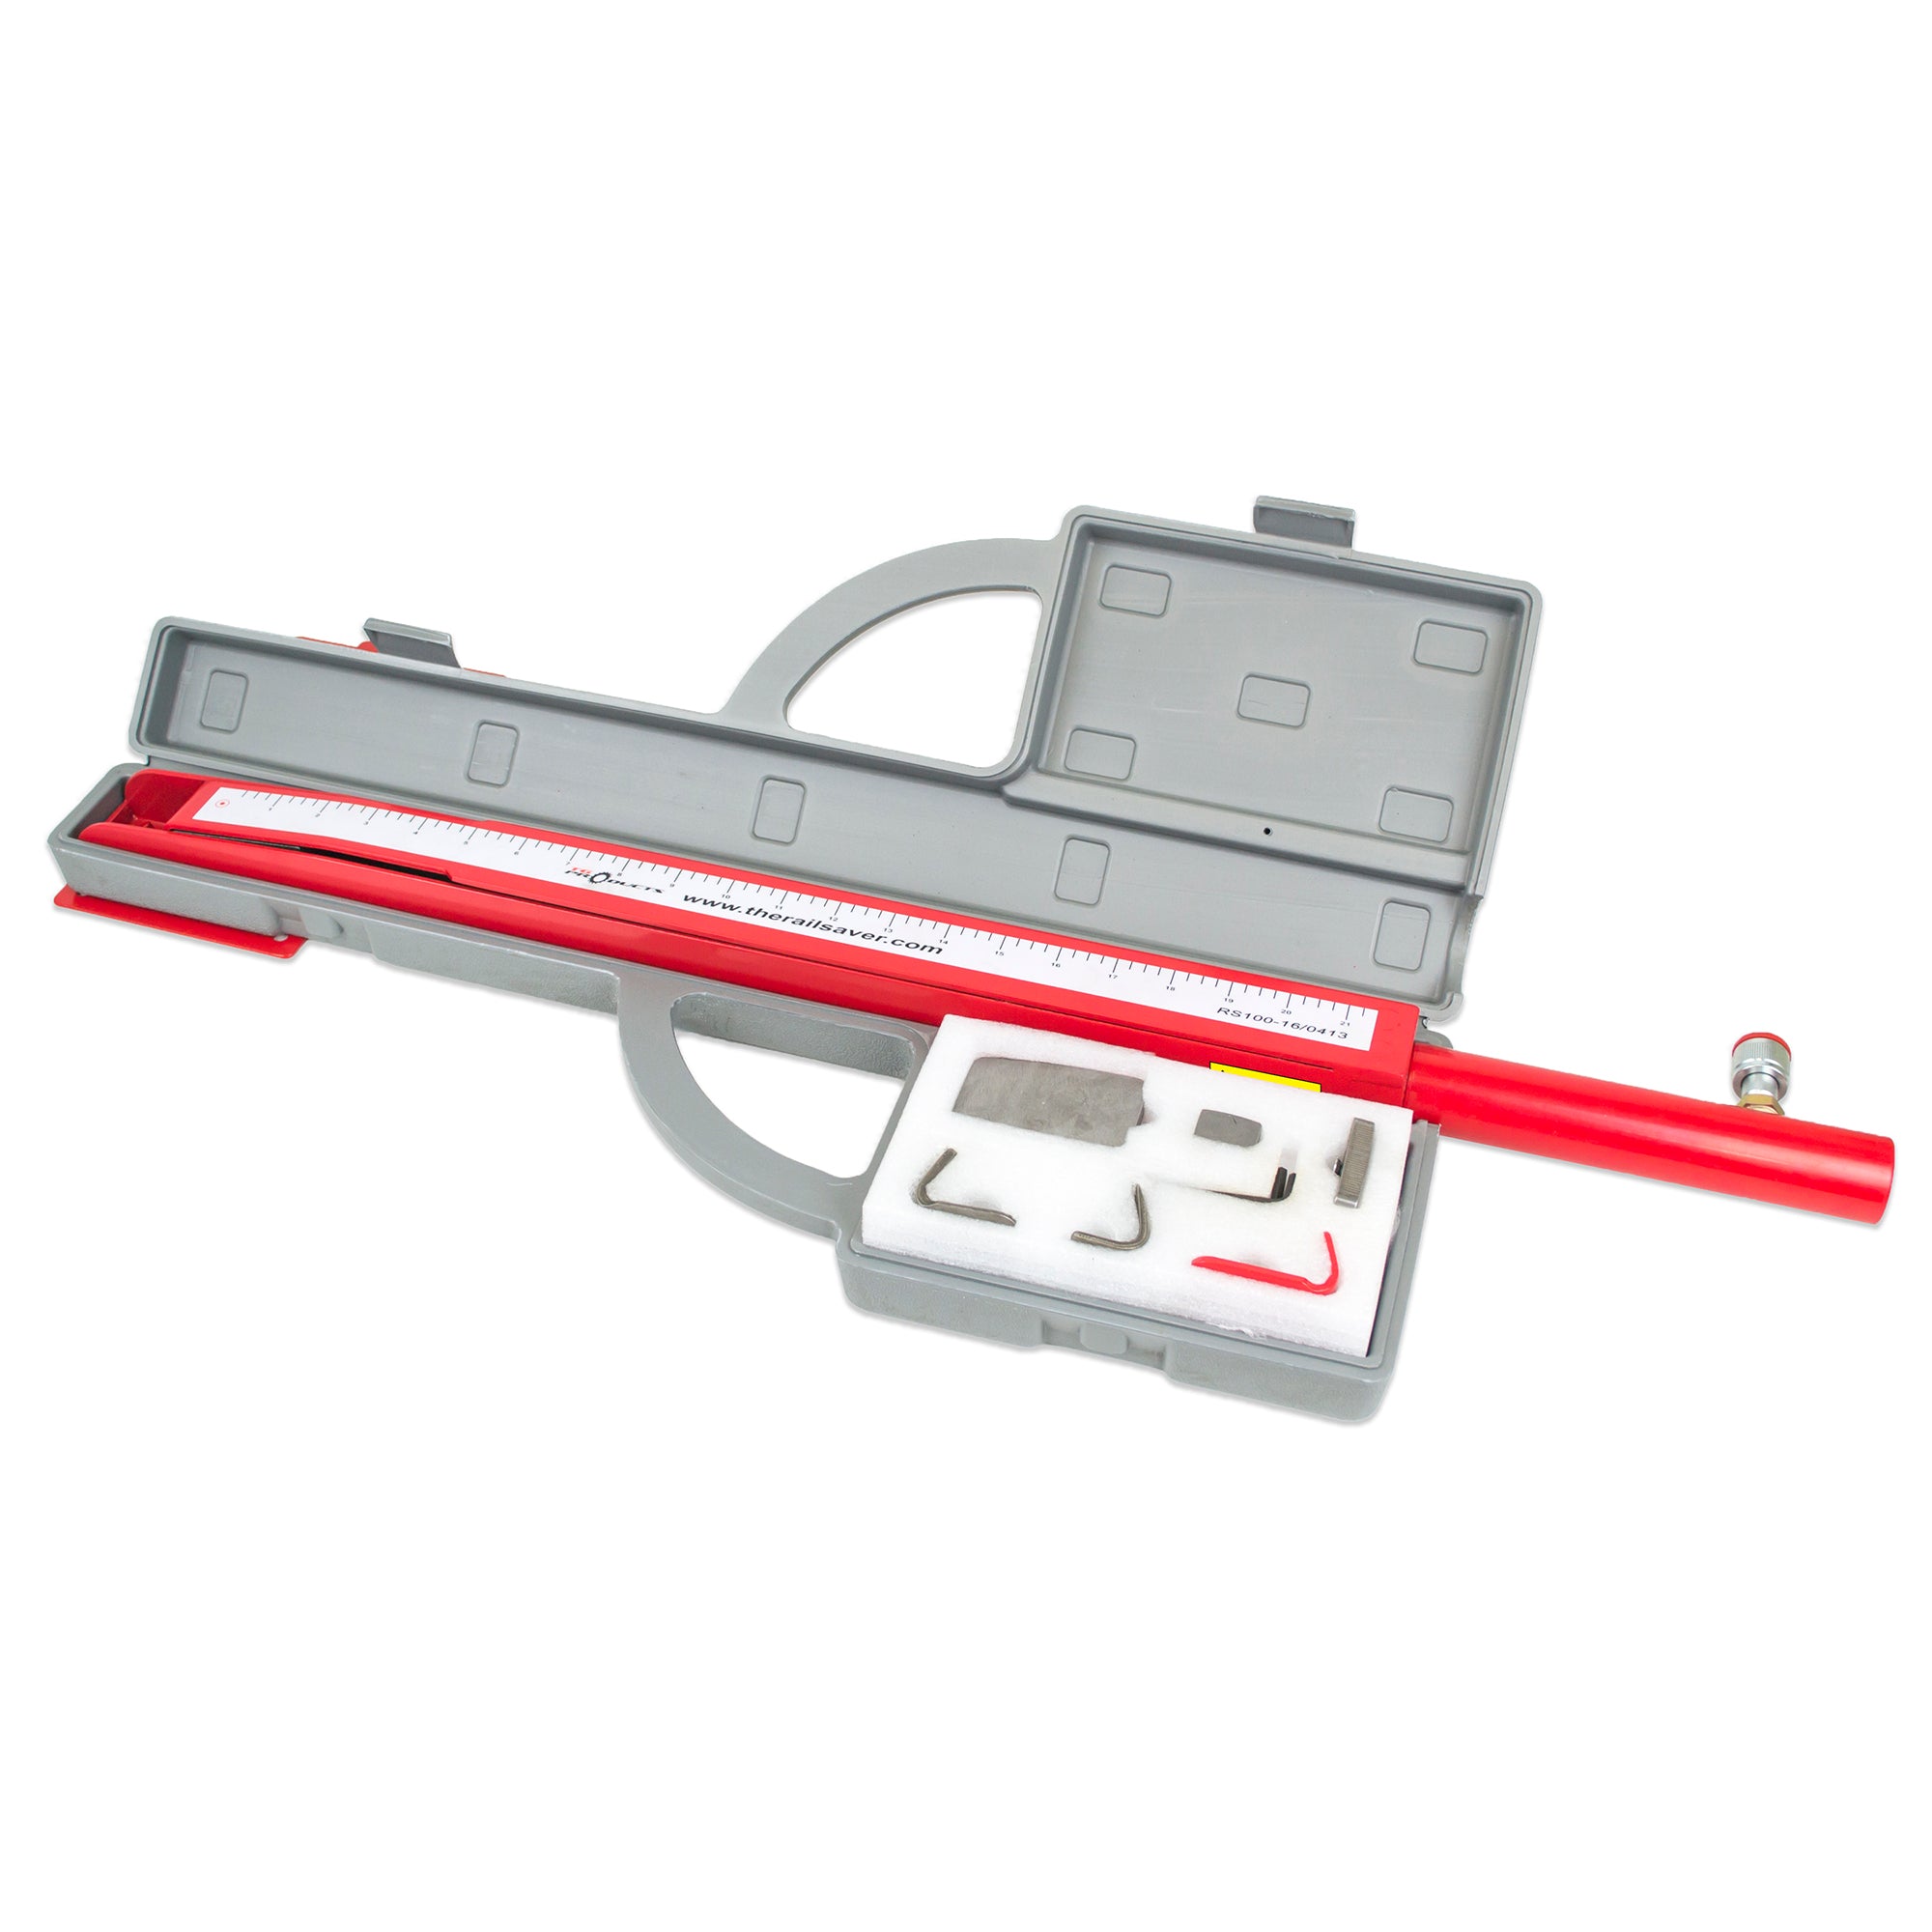 The Rail Saver Repair System, Accessory Kit, Ram, Case and Wall Bracket (Without Pump)